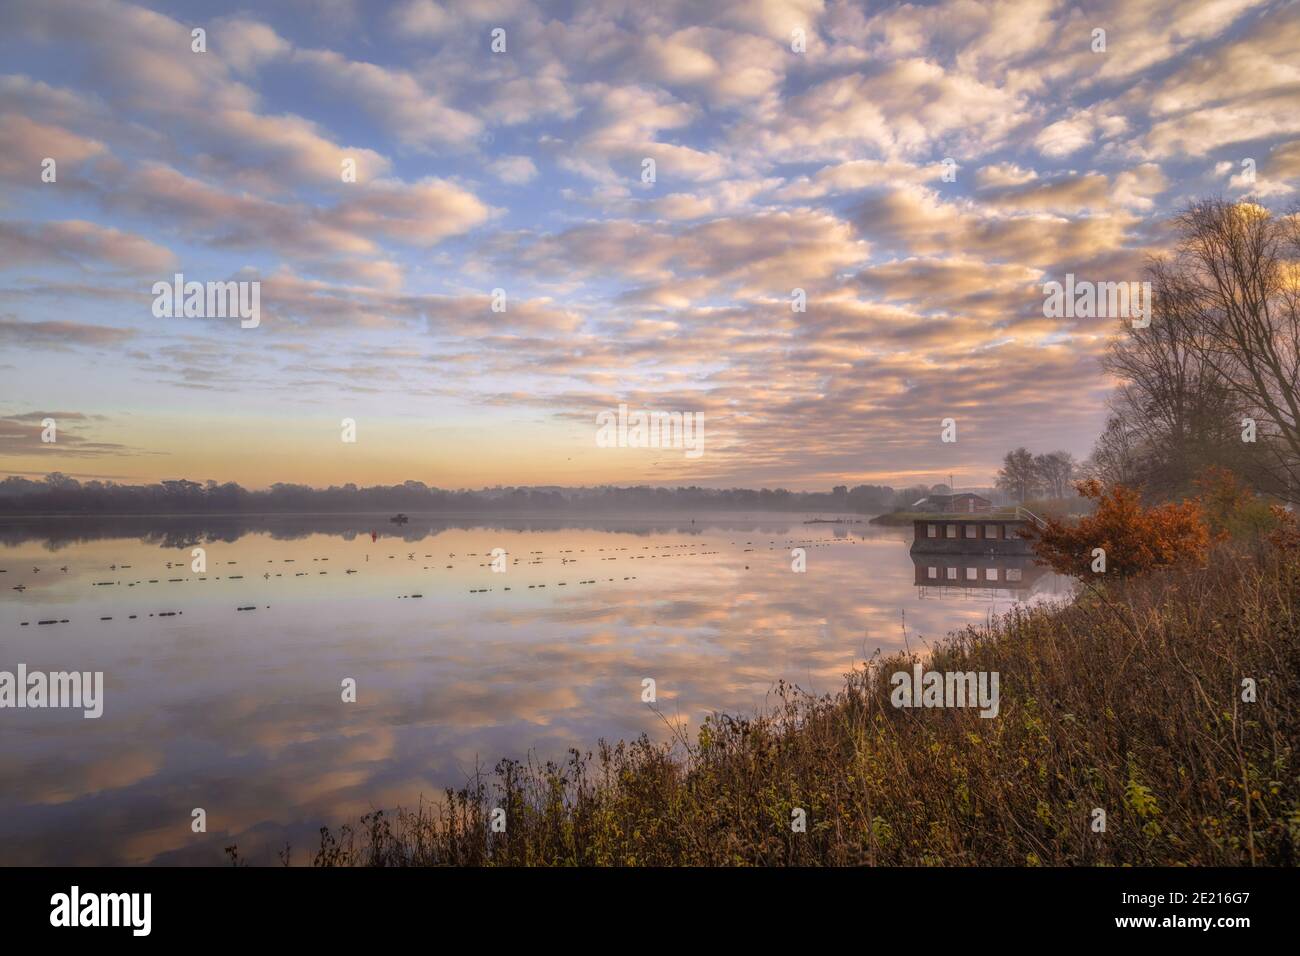 Beautiful natural reflection shots from the Warwickshire area of the UK Stock Photo